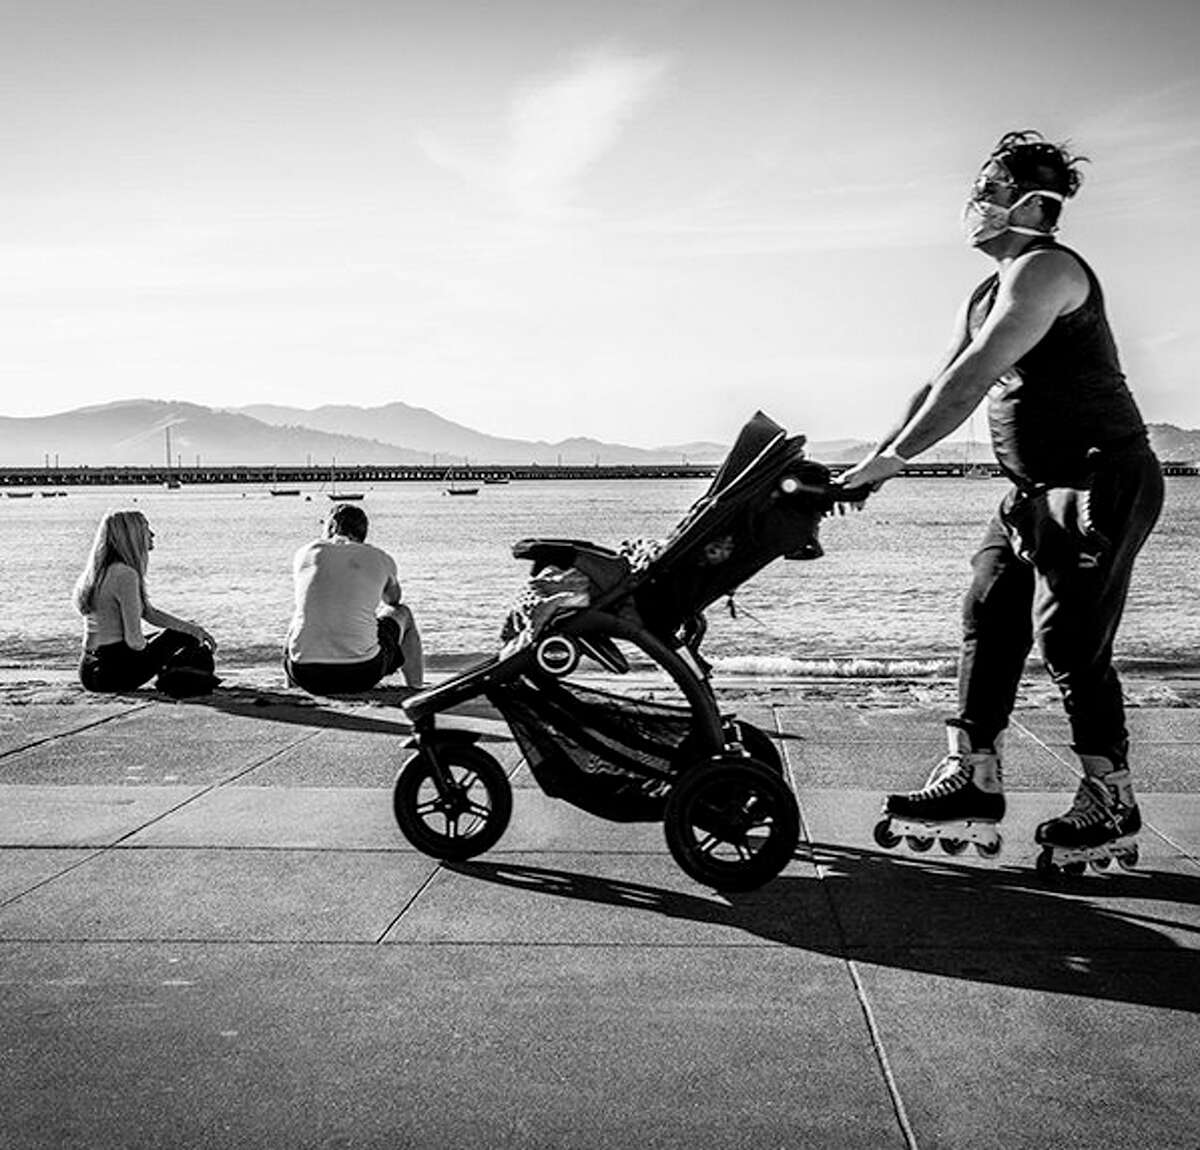 @buza_photography captured this image, "Roller Baby!" on day 41 of the shelter-in-place order in San Francisco. In this frame, the couple to the left were talking about being unemployed while the gentleman in the foreground skating by tries to preserve some semblance of an average day save the mask.